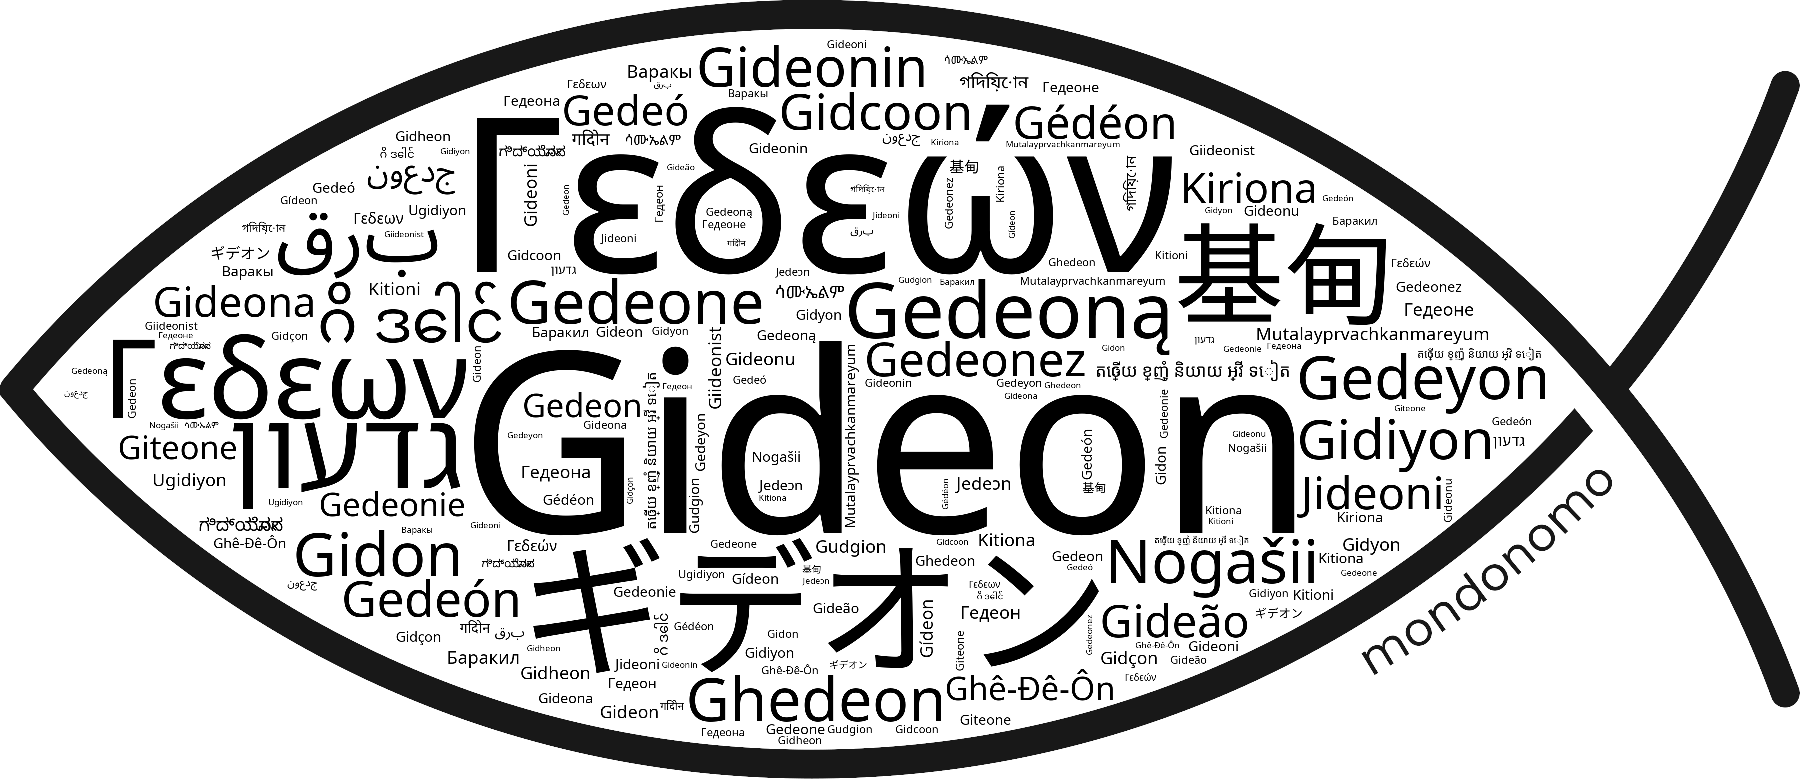 Name Gideon in the world's Bibles